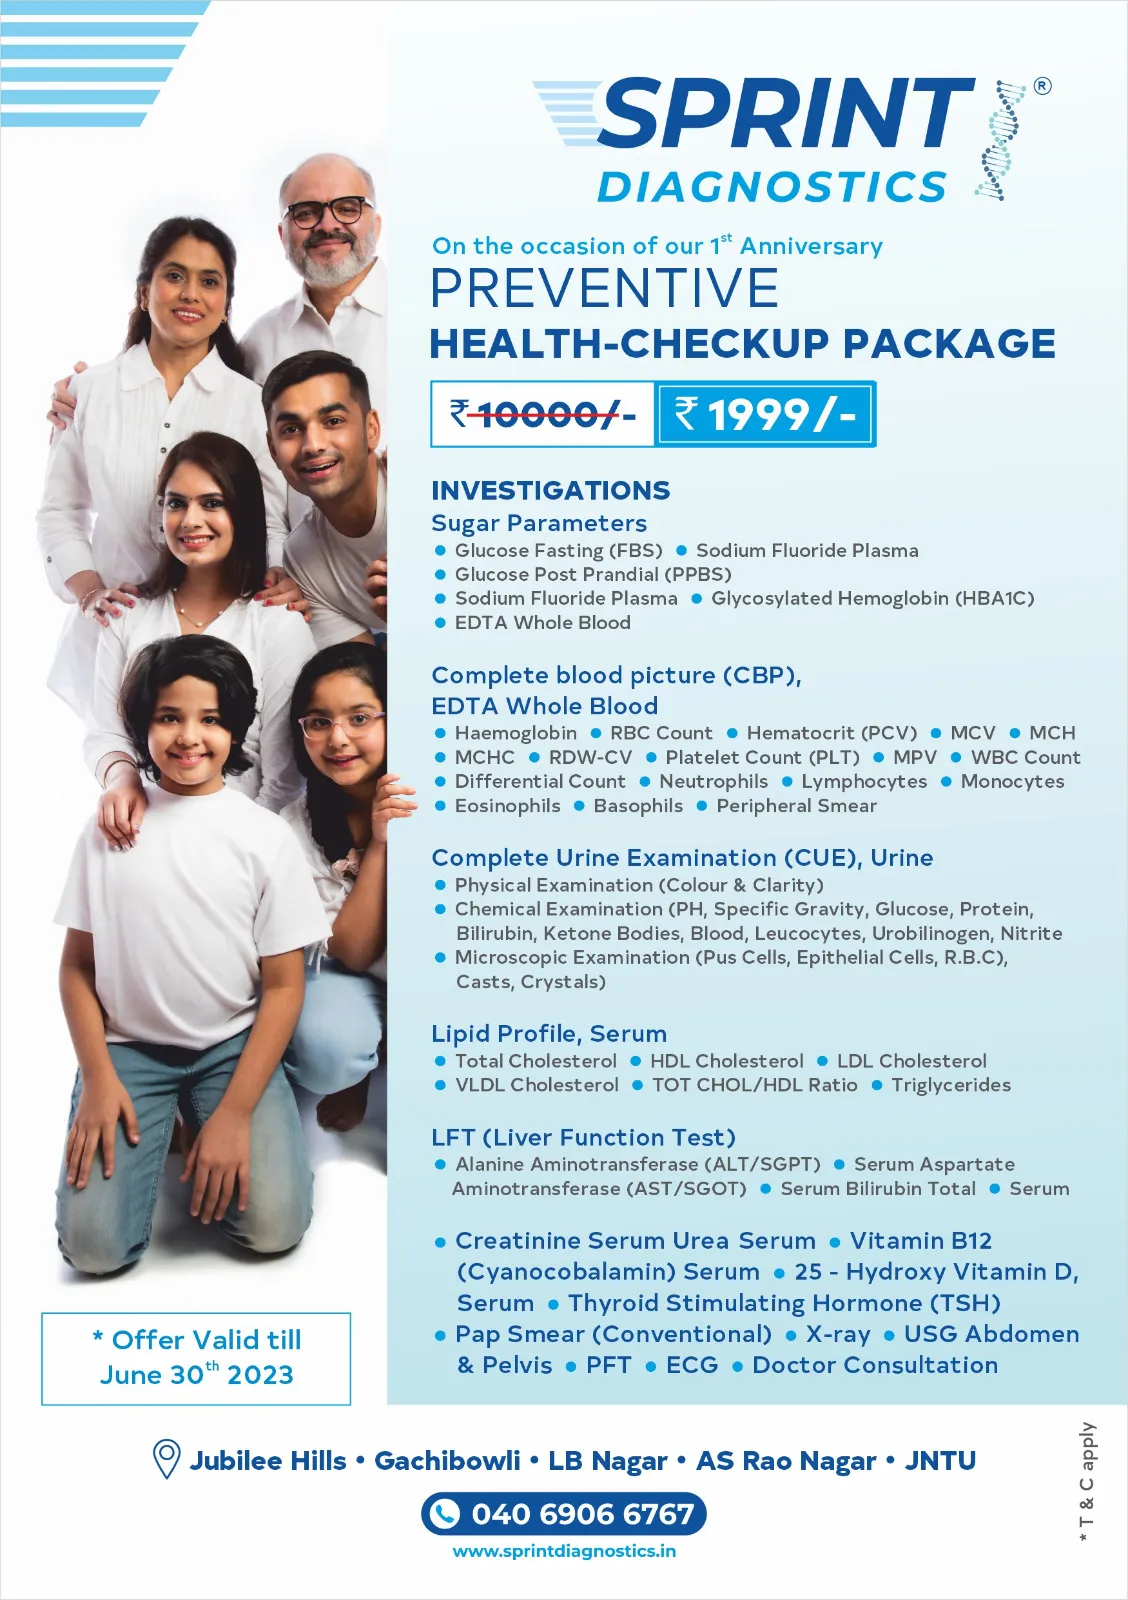 Preventive Health Checkup Package offers